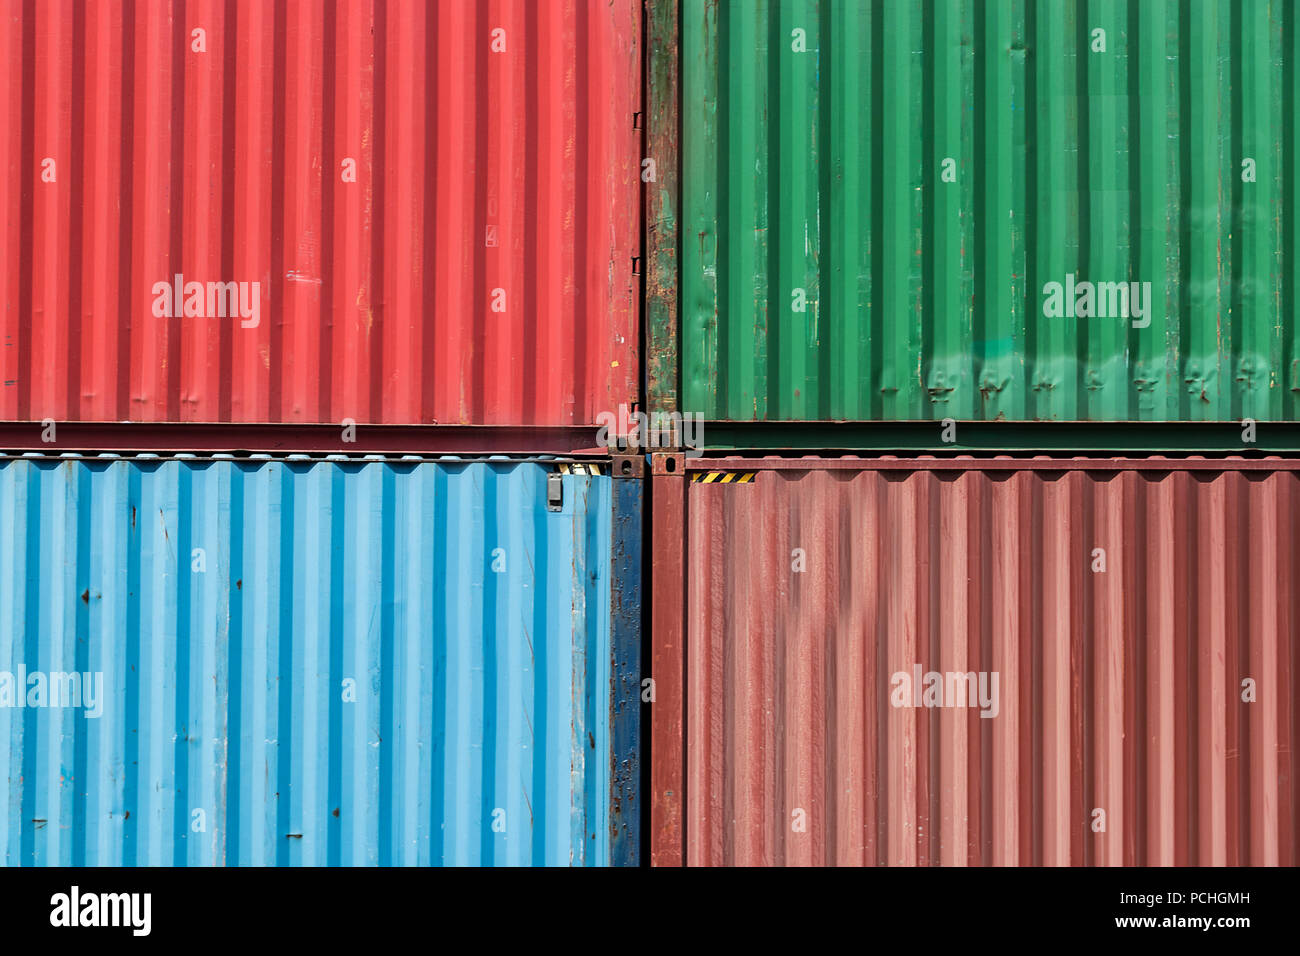 Four shipping containers stacked, rectangular pattern, green, blue and red colors. Stock Photo